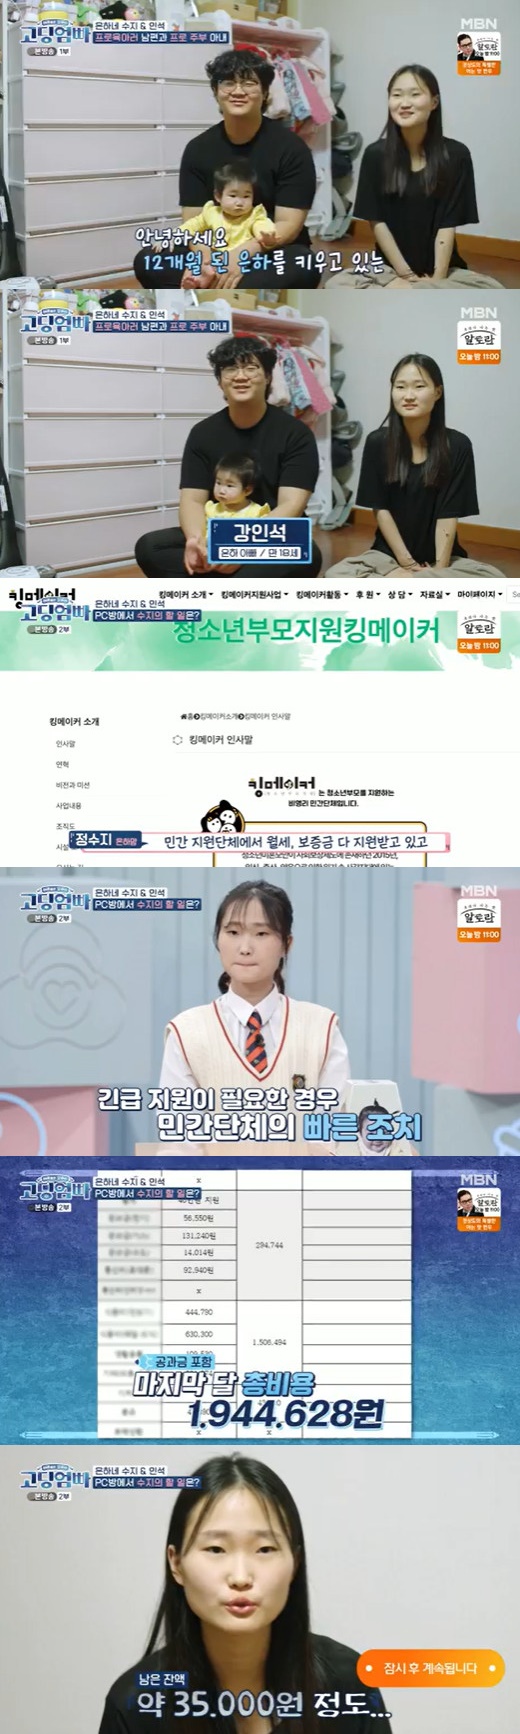 Jung Su-ji, who is raising her daughter Eunha for 12 months, appeared in High school mom dad that adults do not know.MBN s high school mom dad, which was broadcast on the afternoon of the 24th, featured a 18-year-old singer, Kang In-seok, who had a 12-month daughter, Eunha, and a couple of Kang In-seok.On the day of the show, Jung Soo-ji said, Parents generations said, How do you raise your children because you have children? I wanted to break this stereotype.The private support group is receiving monthly rent and deposit, he said. Husband pays 2.5 million won.This month, the remaining balance of utility bills and insurance premiums is about 35,000 won. 